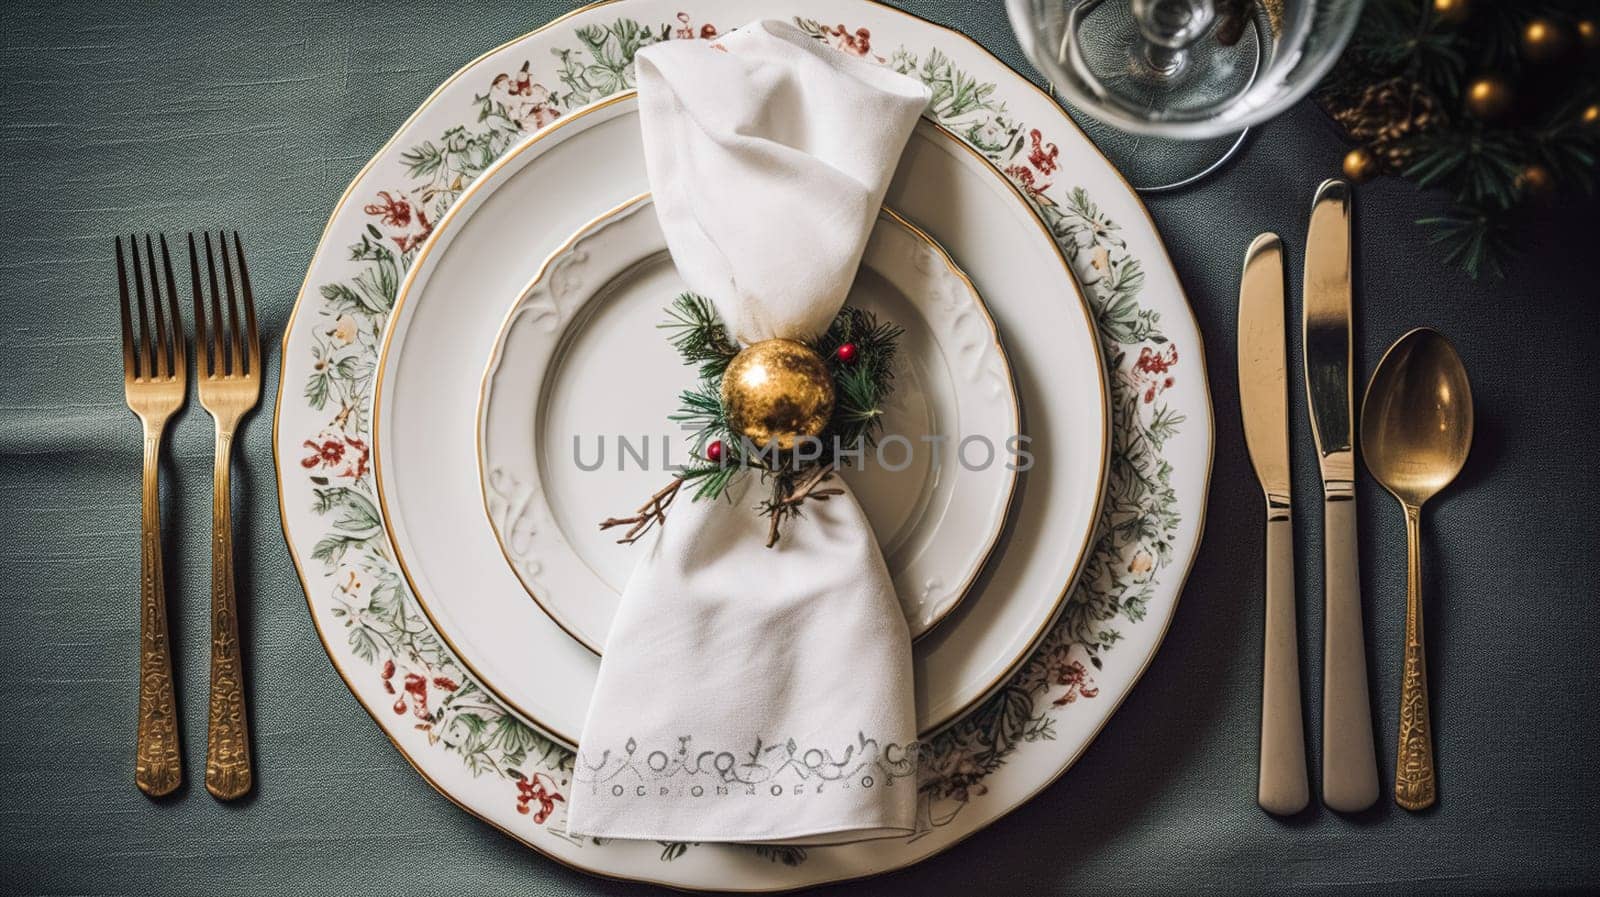 Christmas table decor, holiday tablescape and dinner table setting, formal event decoration for New Year, family celebration, English country and home styling by Anneleven